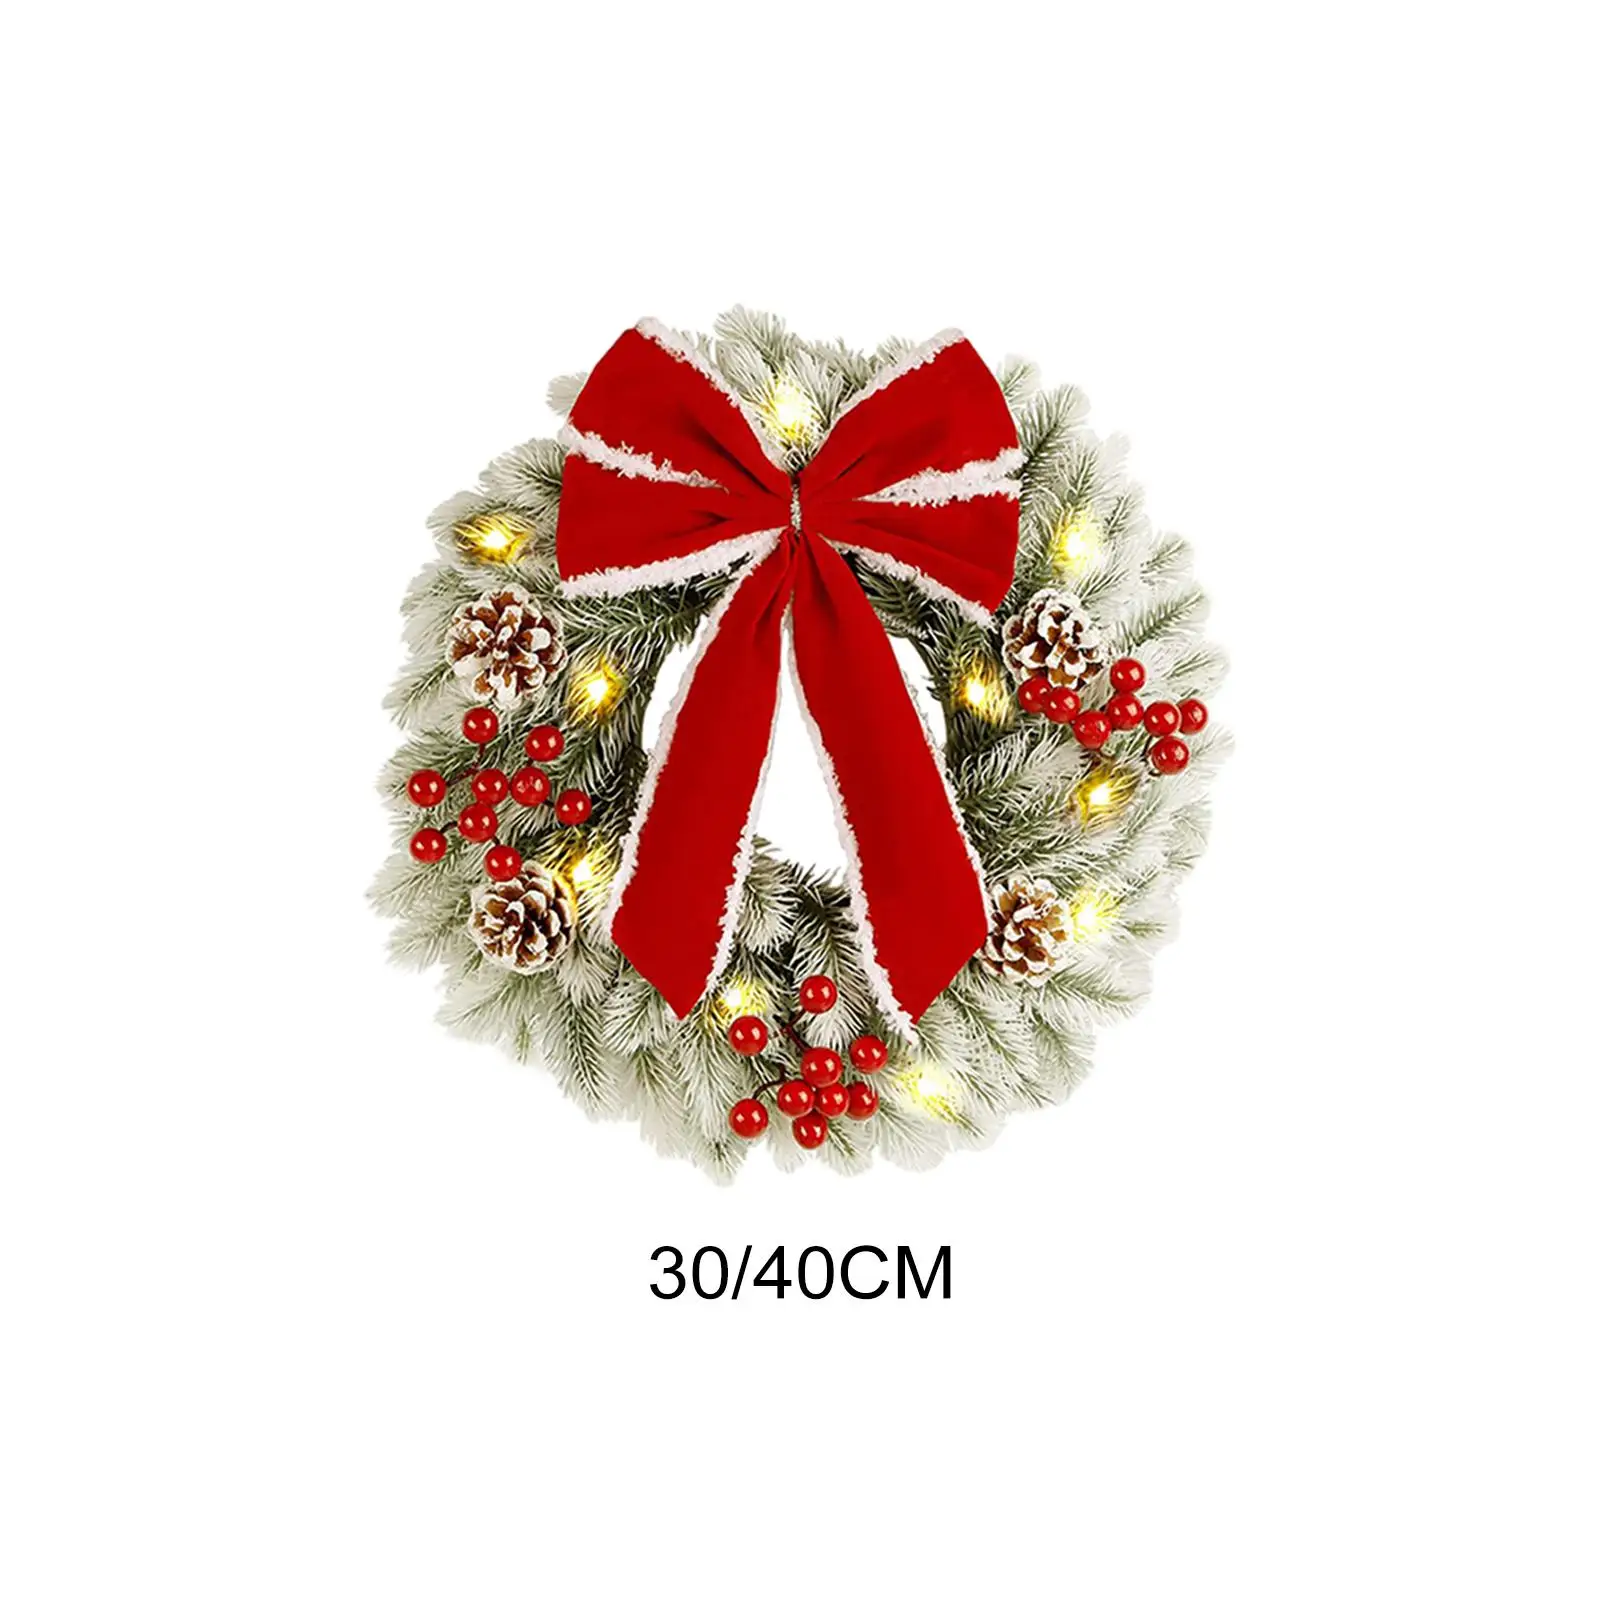 Glowing Christmas Wreath Warm White Lighting Door Wreath Holiday Garland Decoration for Porch Wall Party Indoor Outdoor Ornament